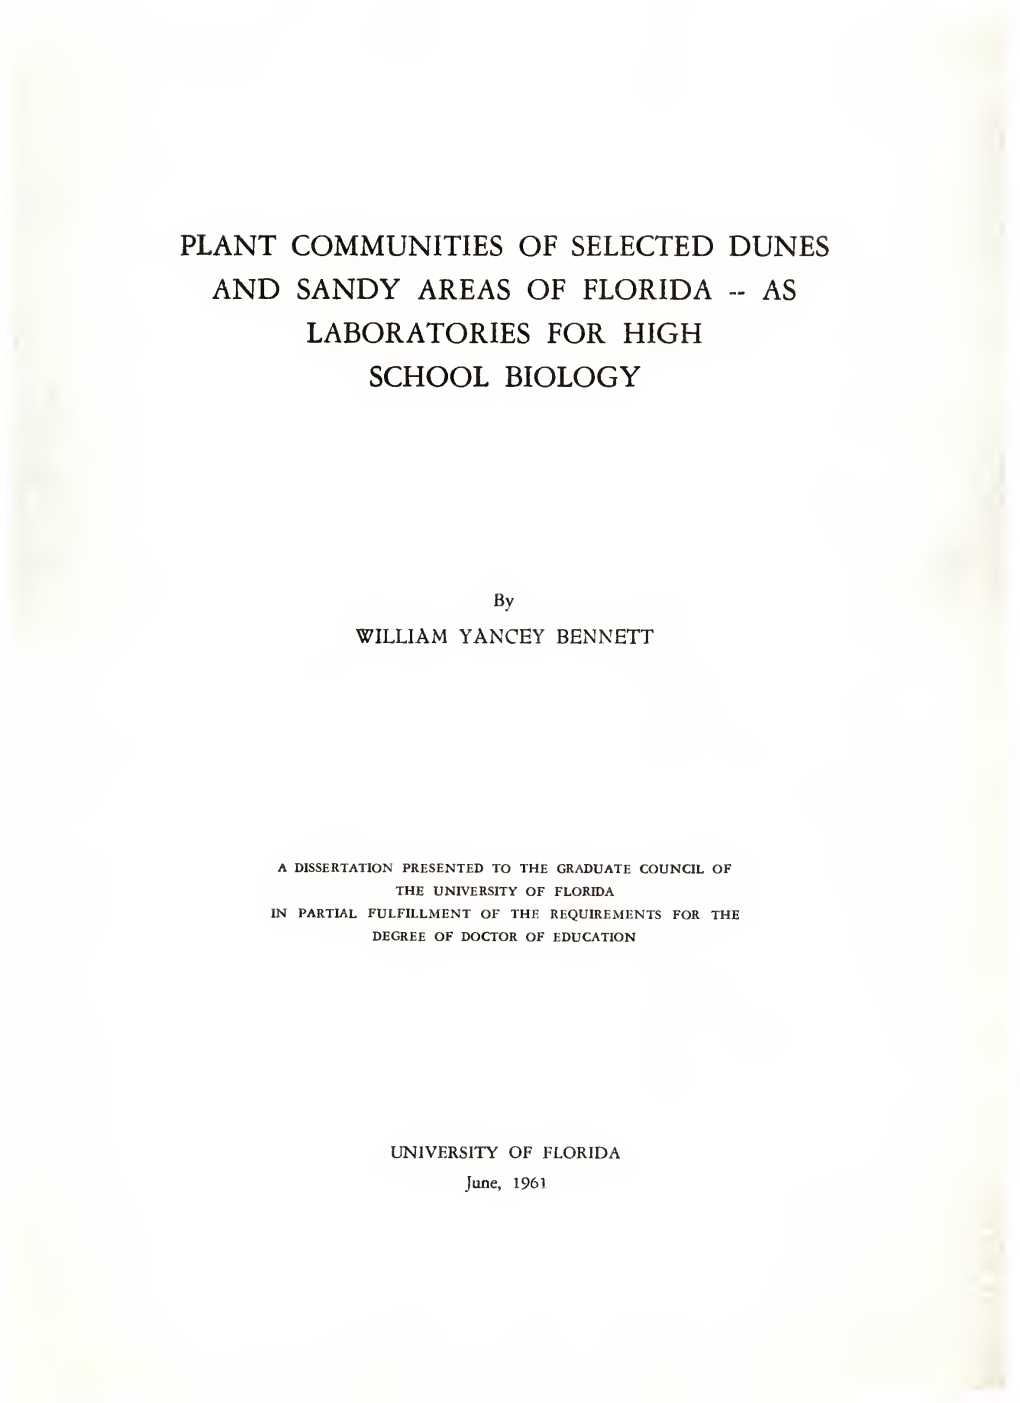 Plant Communities of Selected Dunes and Sandy Areas of Florida - As Laboratories for High School Biology